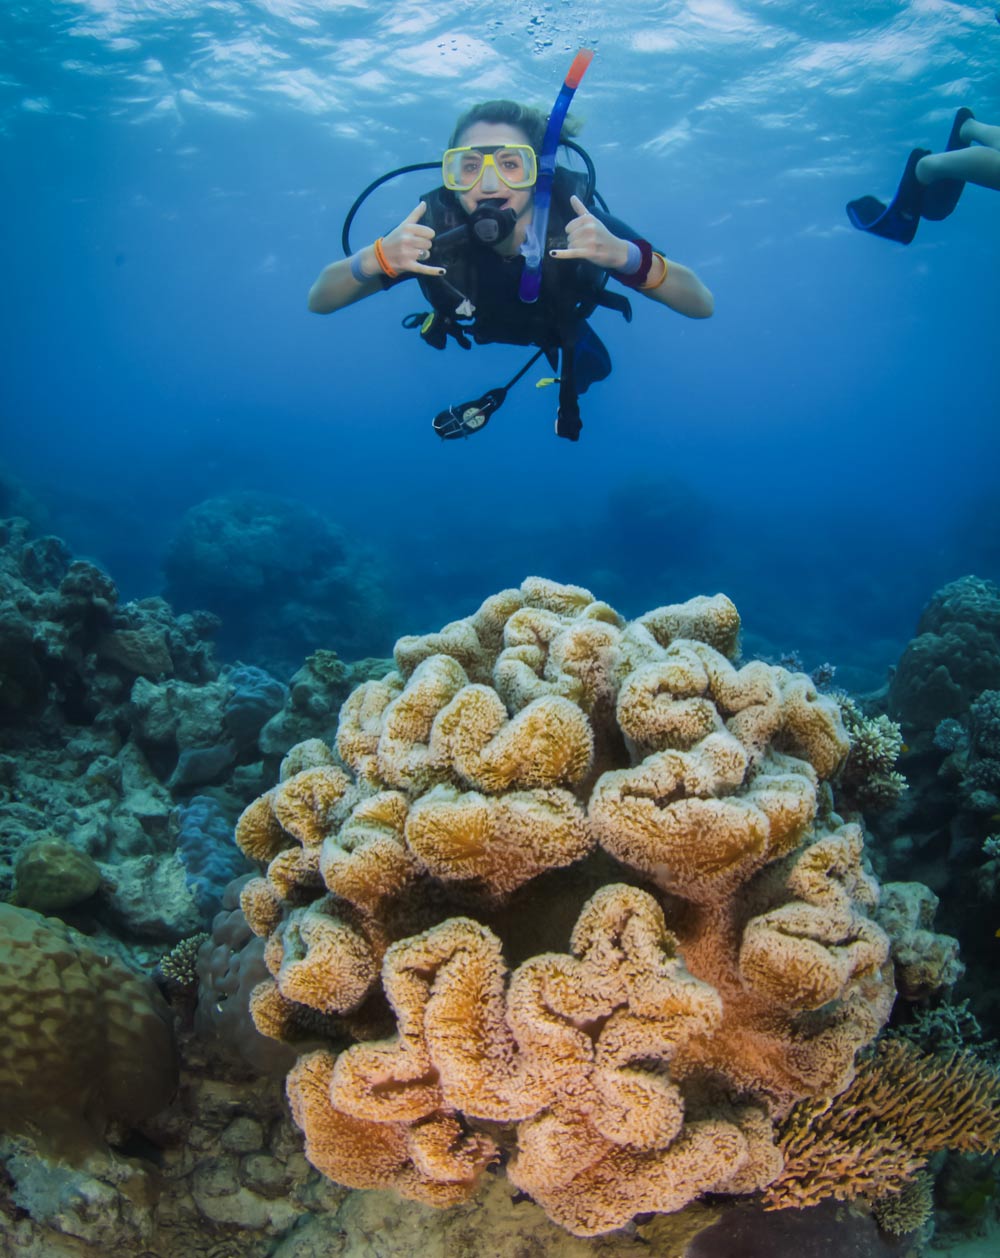 A woman enjoys diving in the Great Barrier Reef amongst the coral 